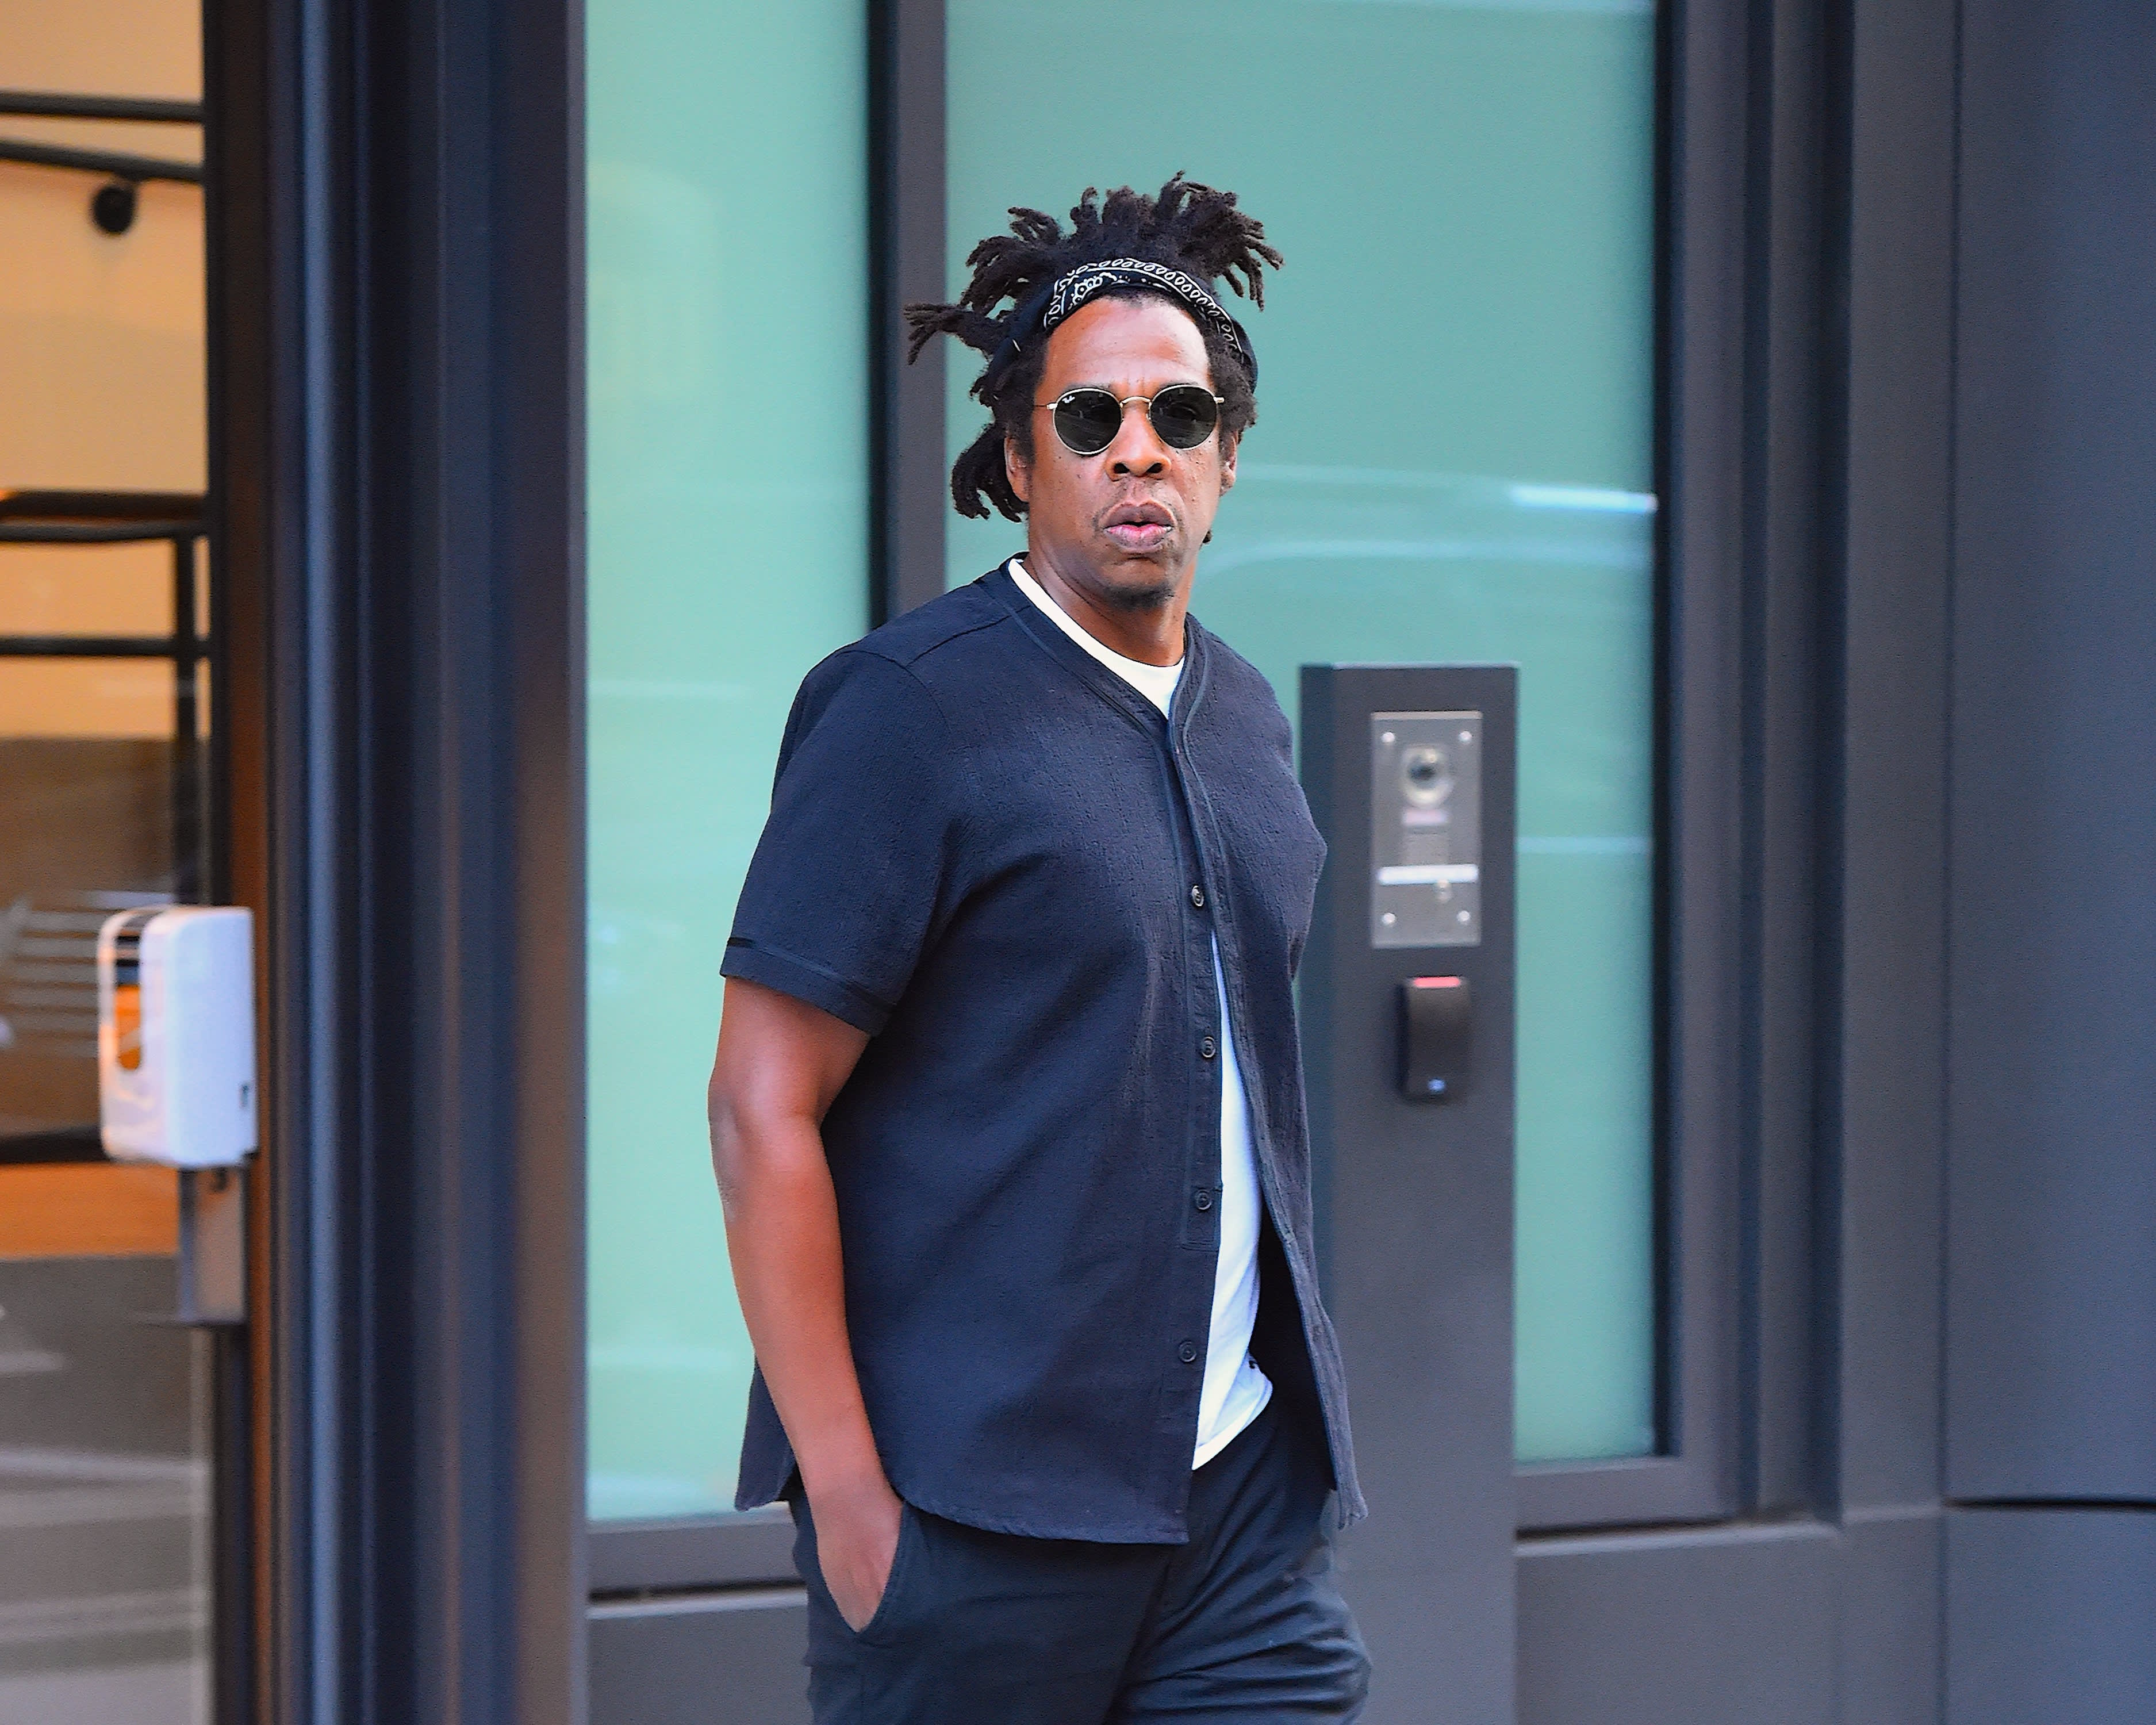 Jay-Z plans to speak to Wall Street titans at Robin Hood investors